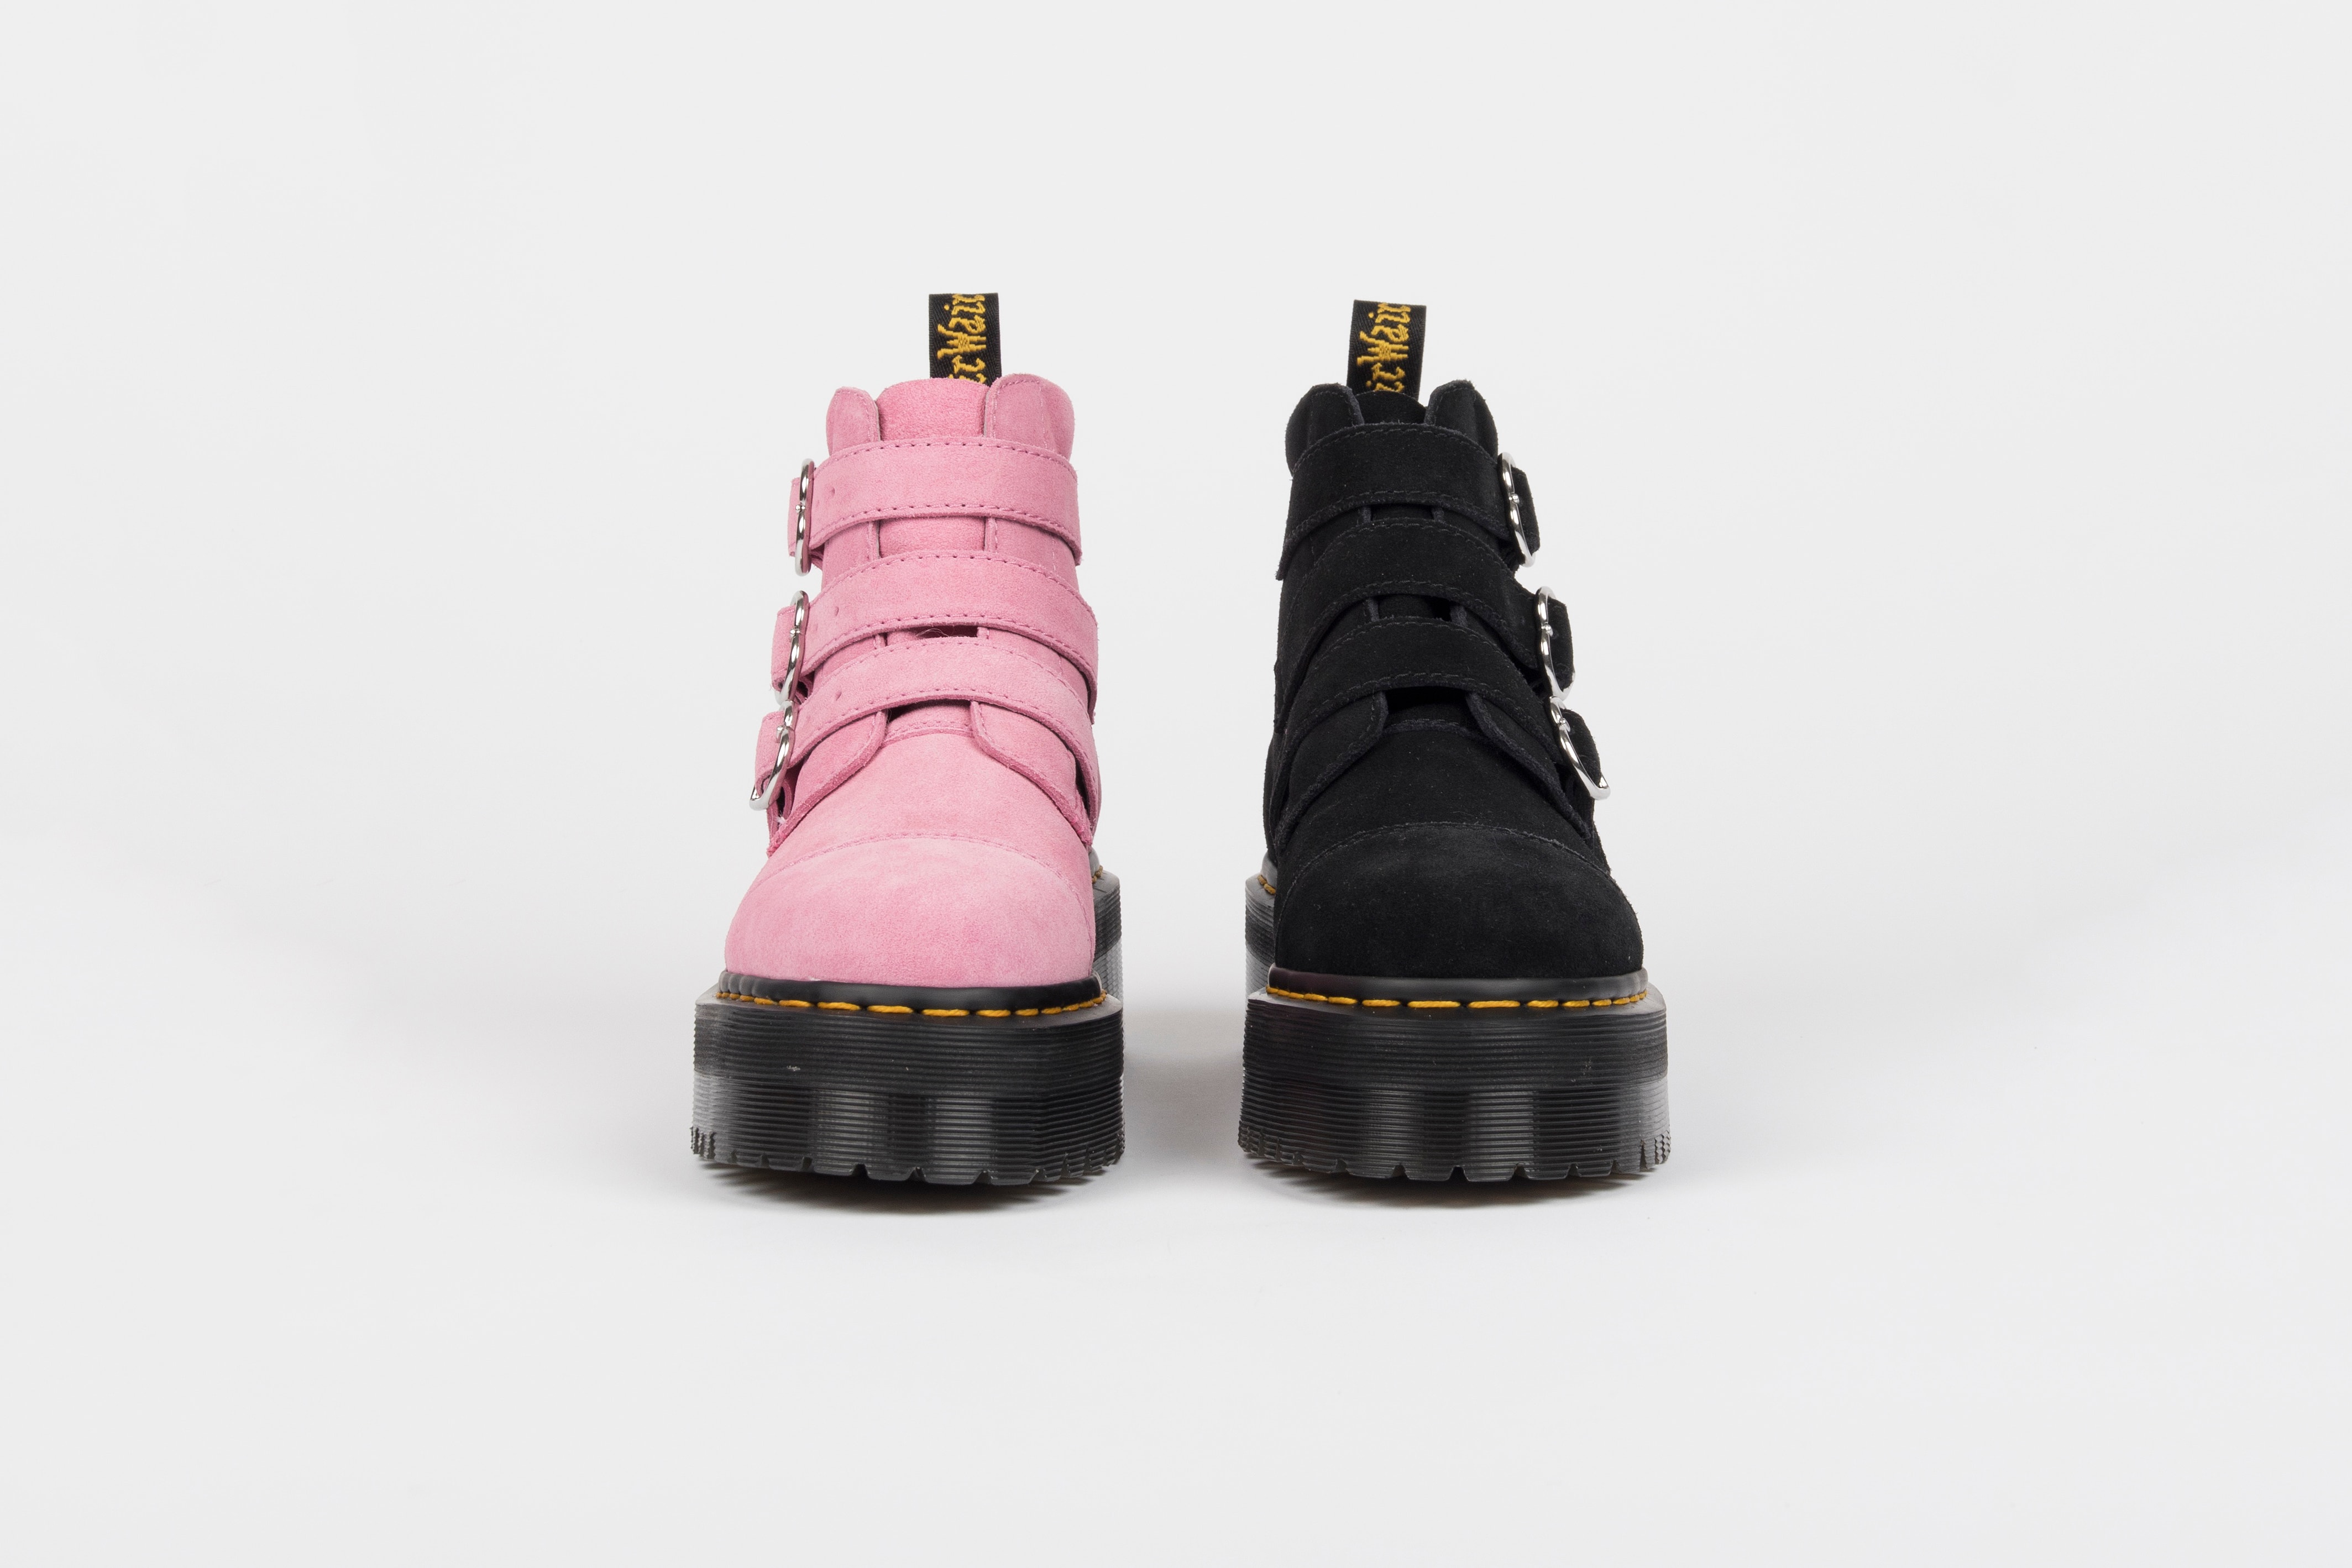 LAZY OAF x Dr. Martens 联名 Buckle Boot 靴款